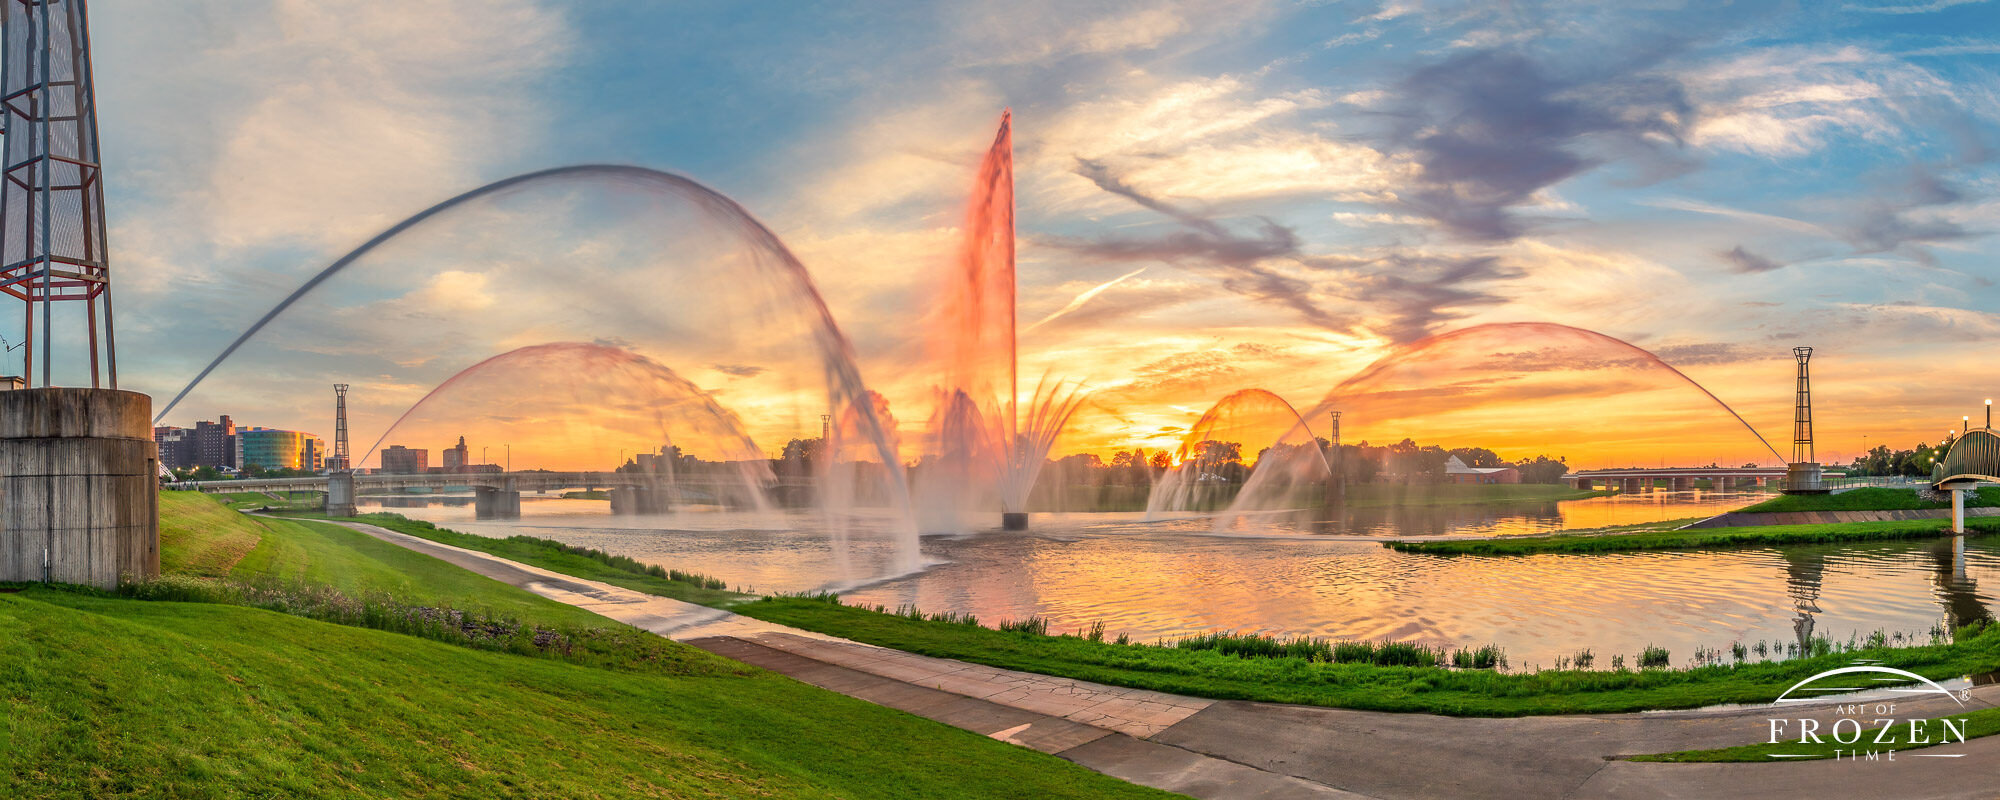 Dayton’s Fountain of Light panorama erupting at sunset while in the background, high cirrus clouds catch the day’s last rays.